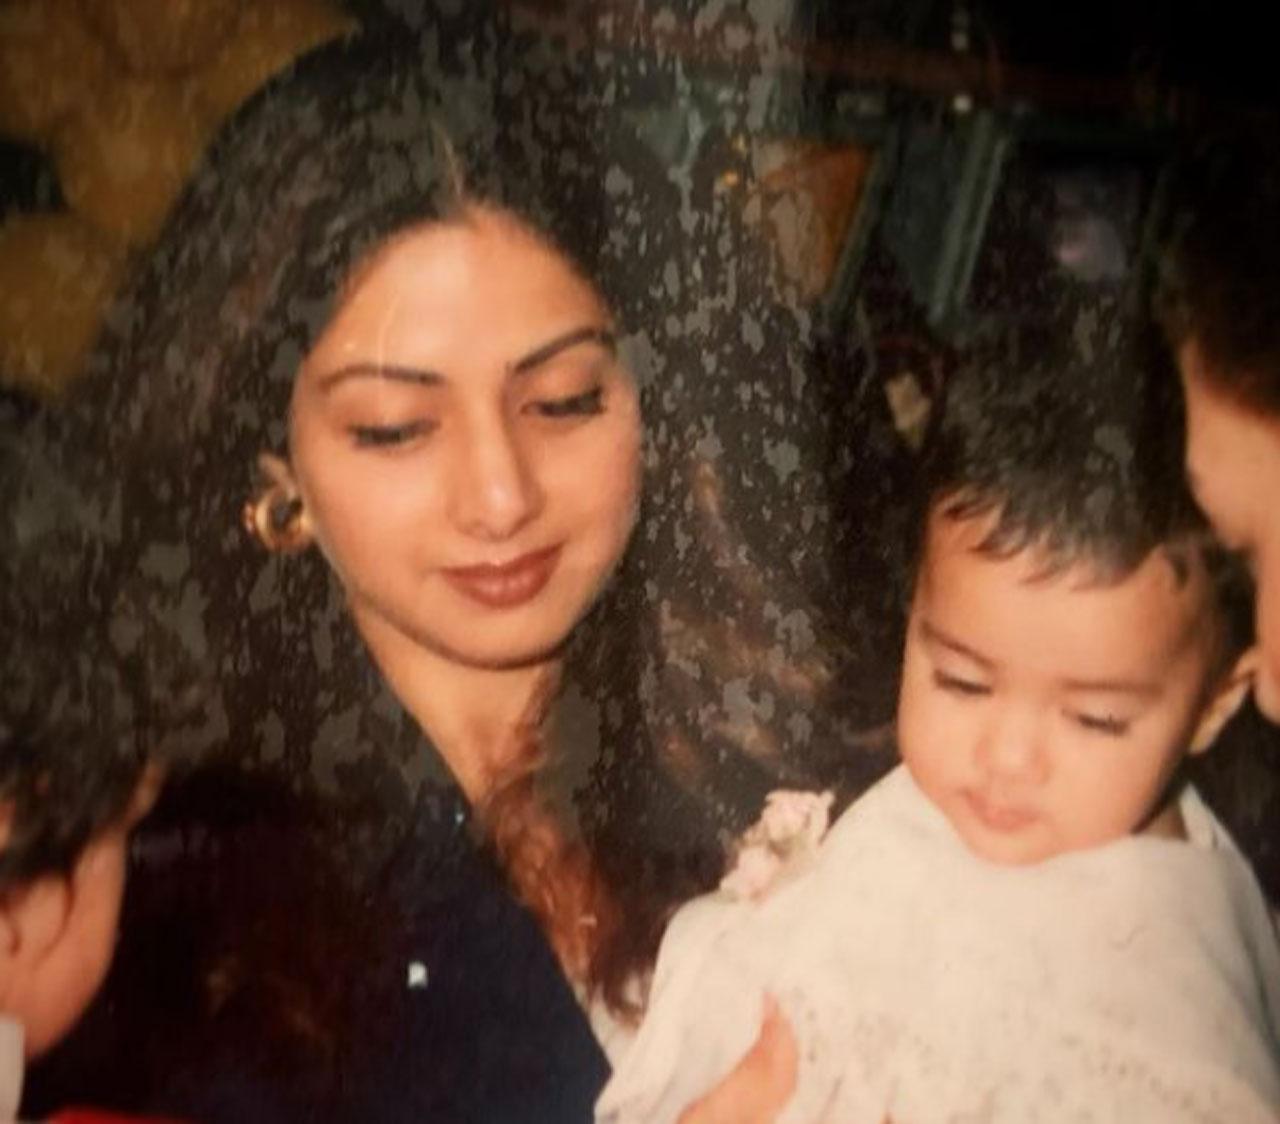 Janhvi Kapoor shared a picture with her mother Sridevi and made one and all nostalgic on the occasion of Mother's Day. She posts a picture with her every year on this day. Kapoor made a fashion statement recently in a striking silver ensemble. Taking to her Instagram Handle on Friday, the actor posted several pictures where she can be seen wearing a shimmery silver bodycon gown. She styled her hair in a sleek high ponytail and did minimal makeup with smokey eyes.